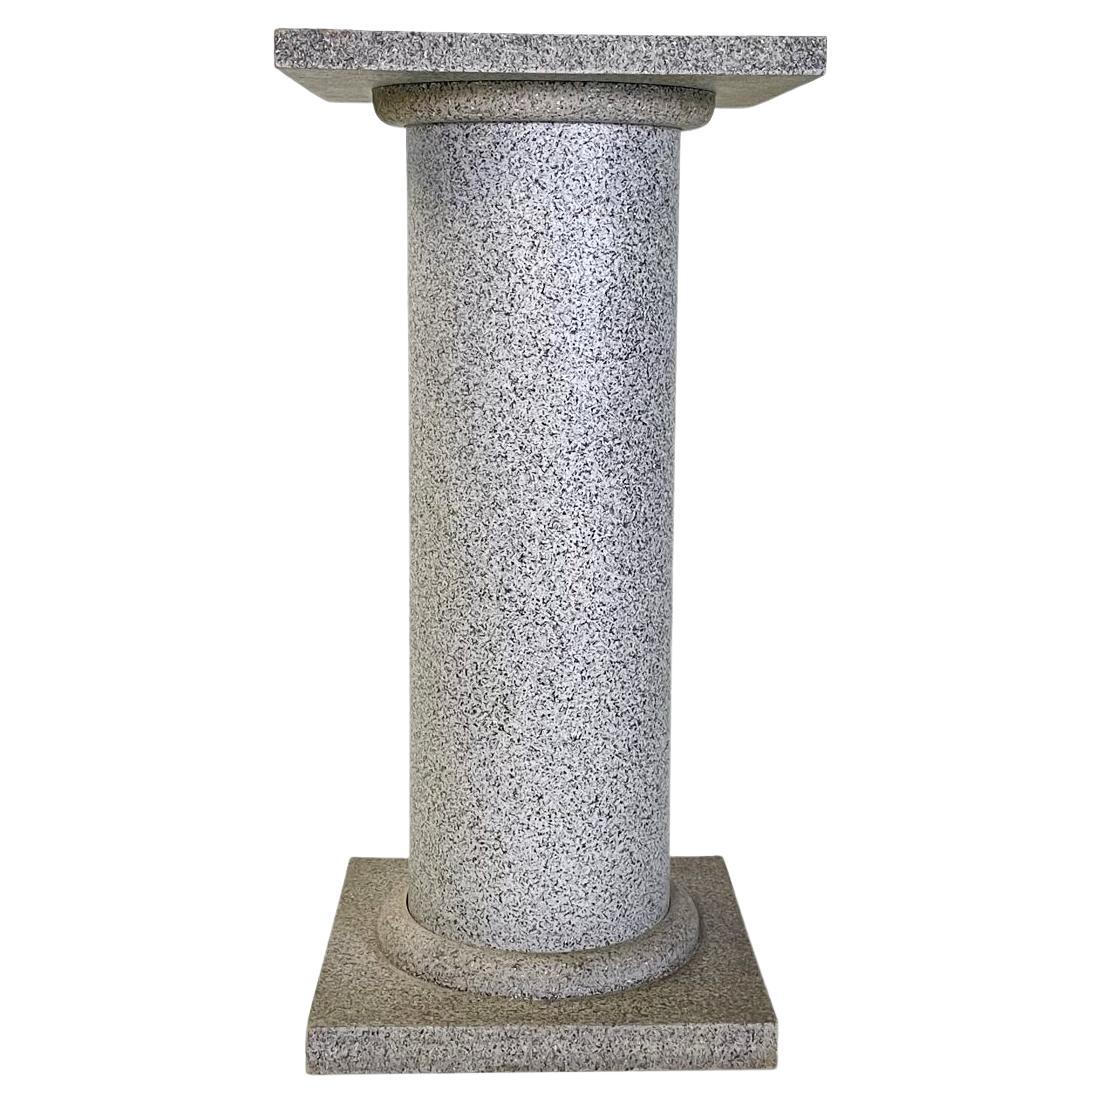 Italian Modern Pedestal Column in Wood Painted as Stone, 1990s-2000s For Sale